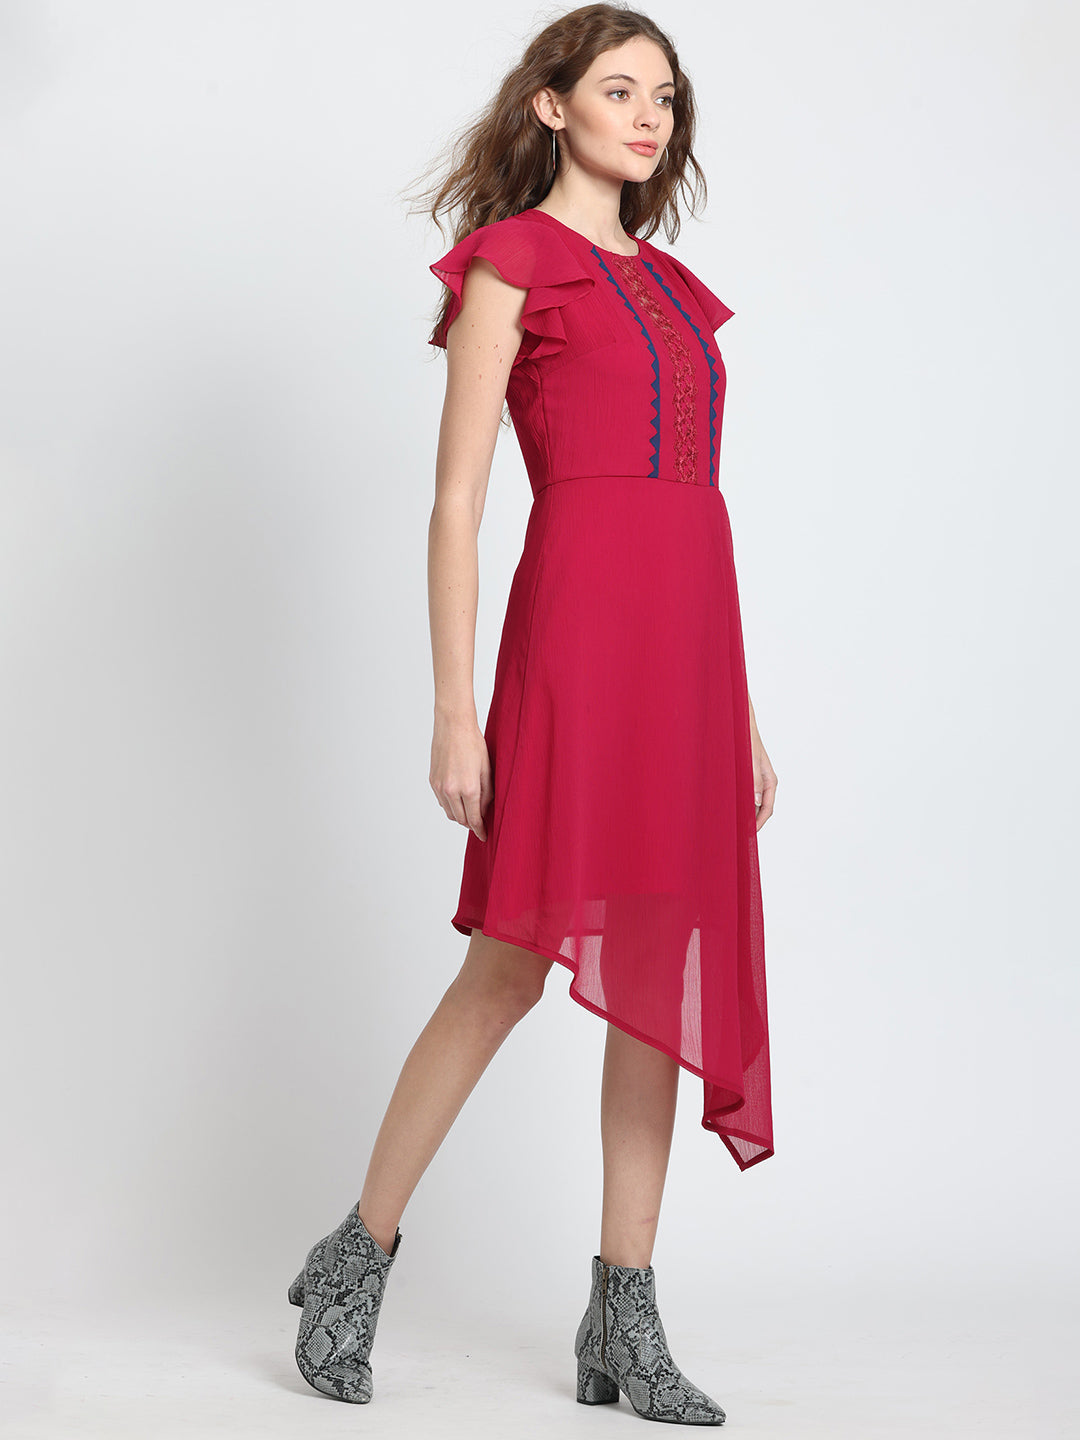 Passion Dress from Shaye , Dress for women